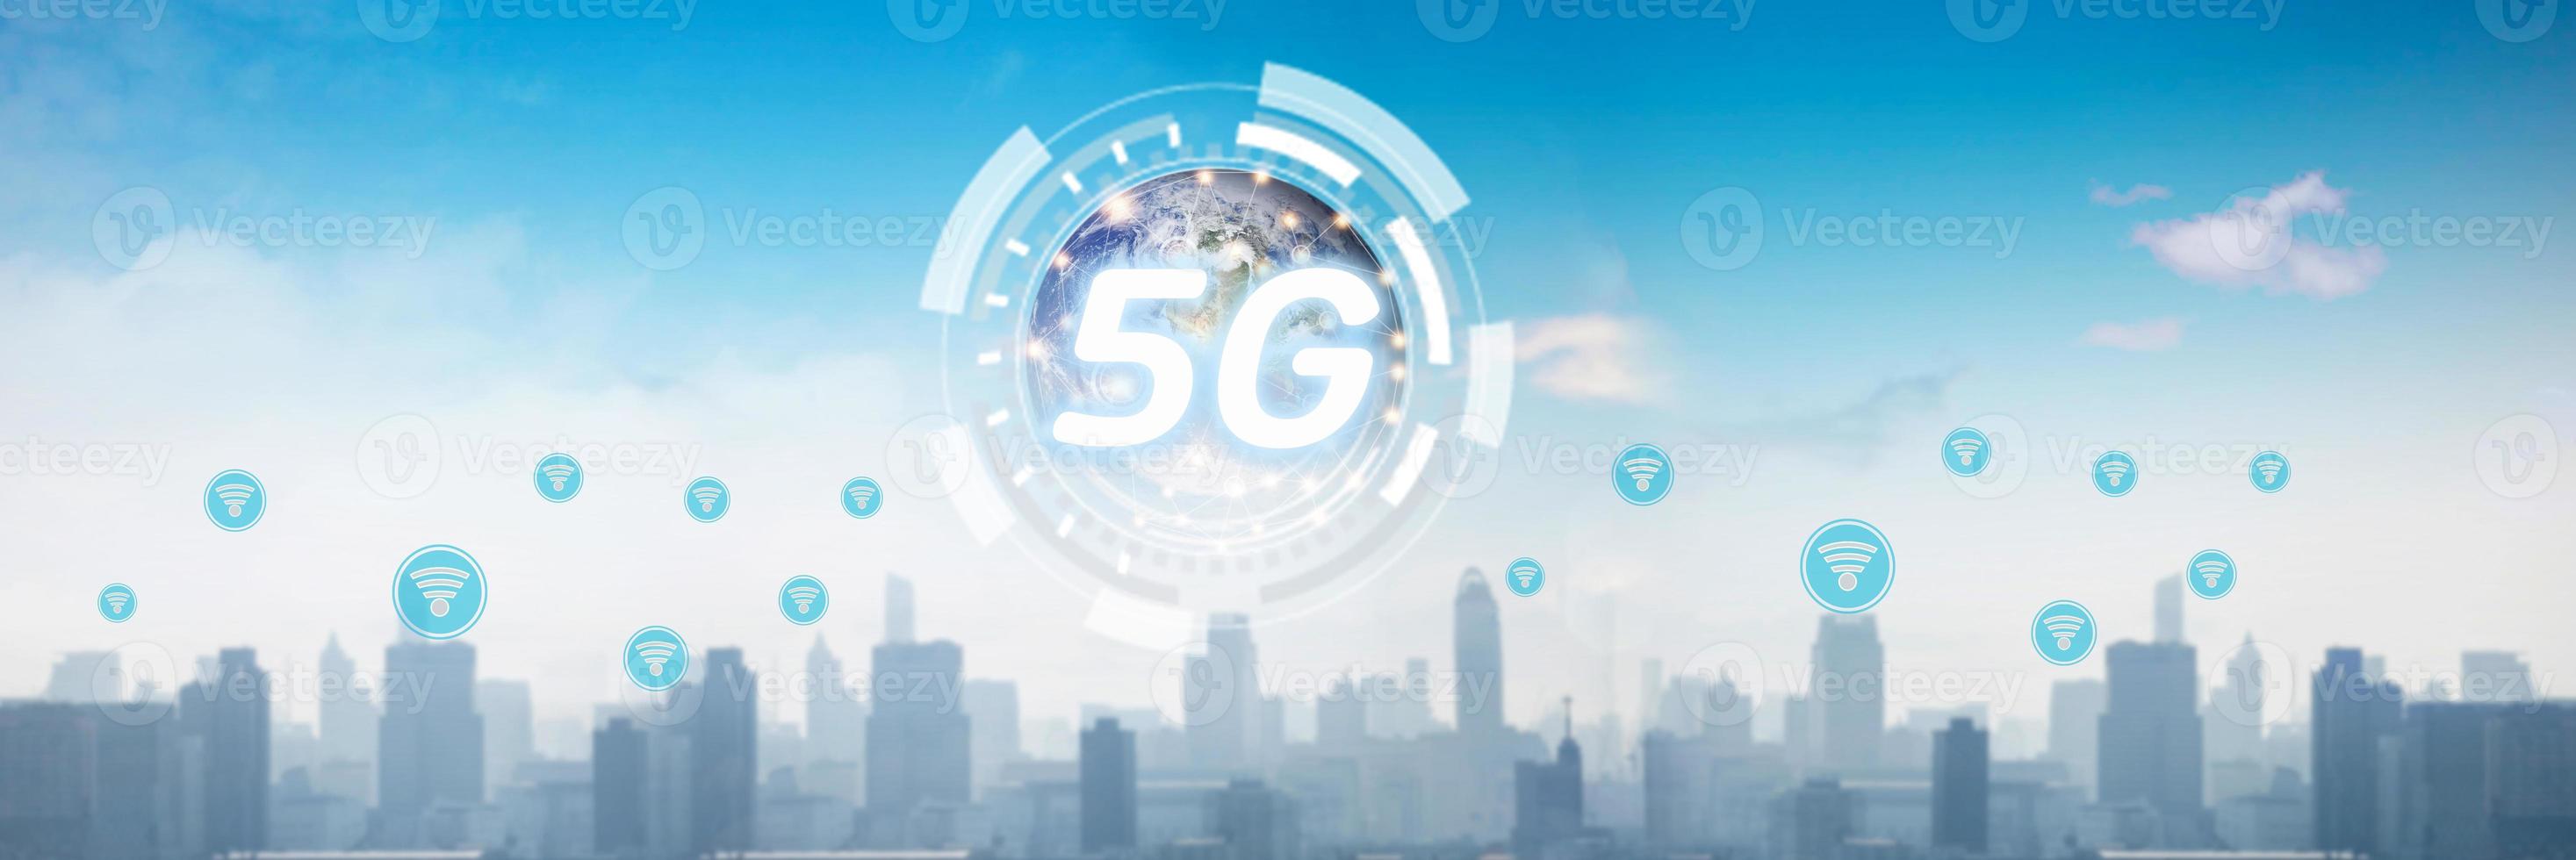 5G and technology global network over city, digital concept photo